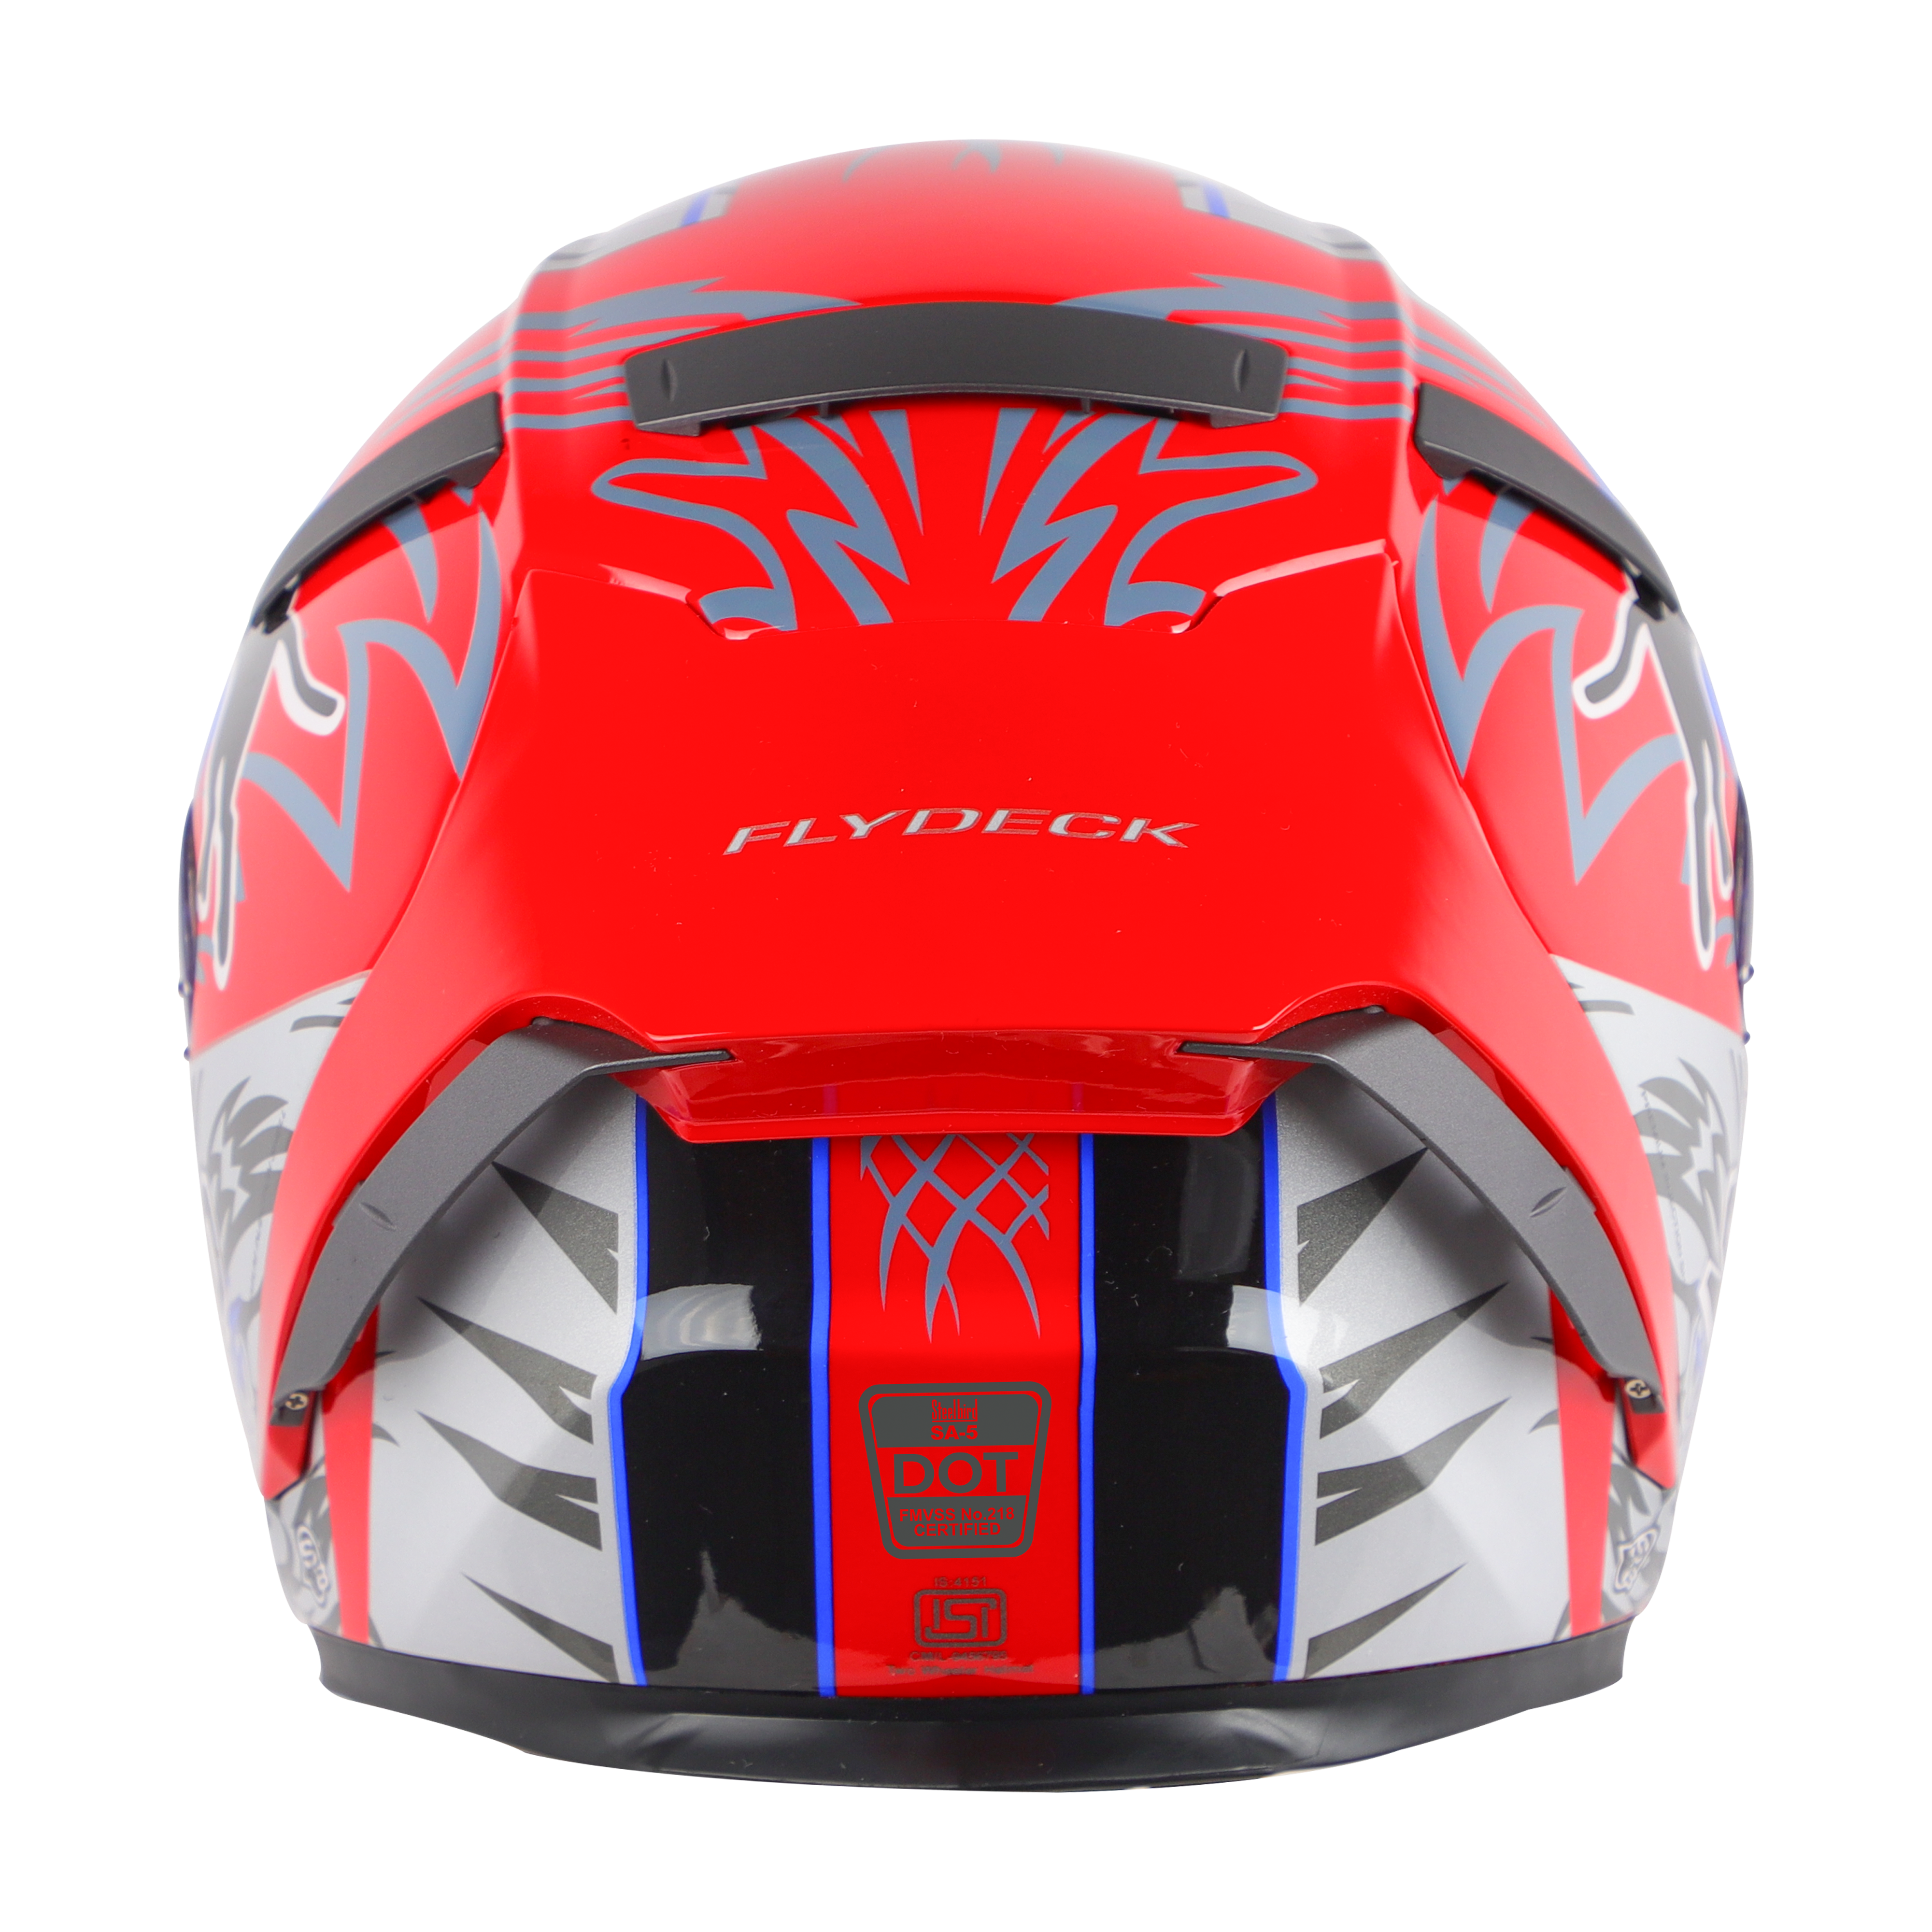 SA-5 DOT FLYDECK GLOSSY RED WITH BLUE (WITH ANTI-FOG SHIELD VISOR) 